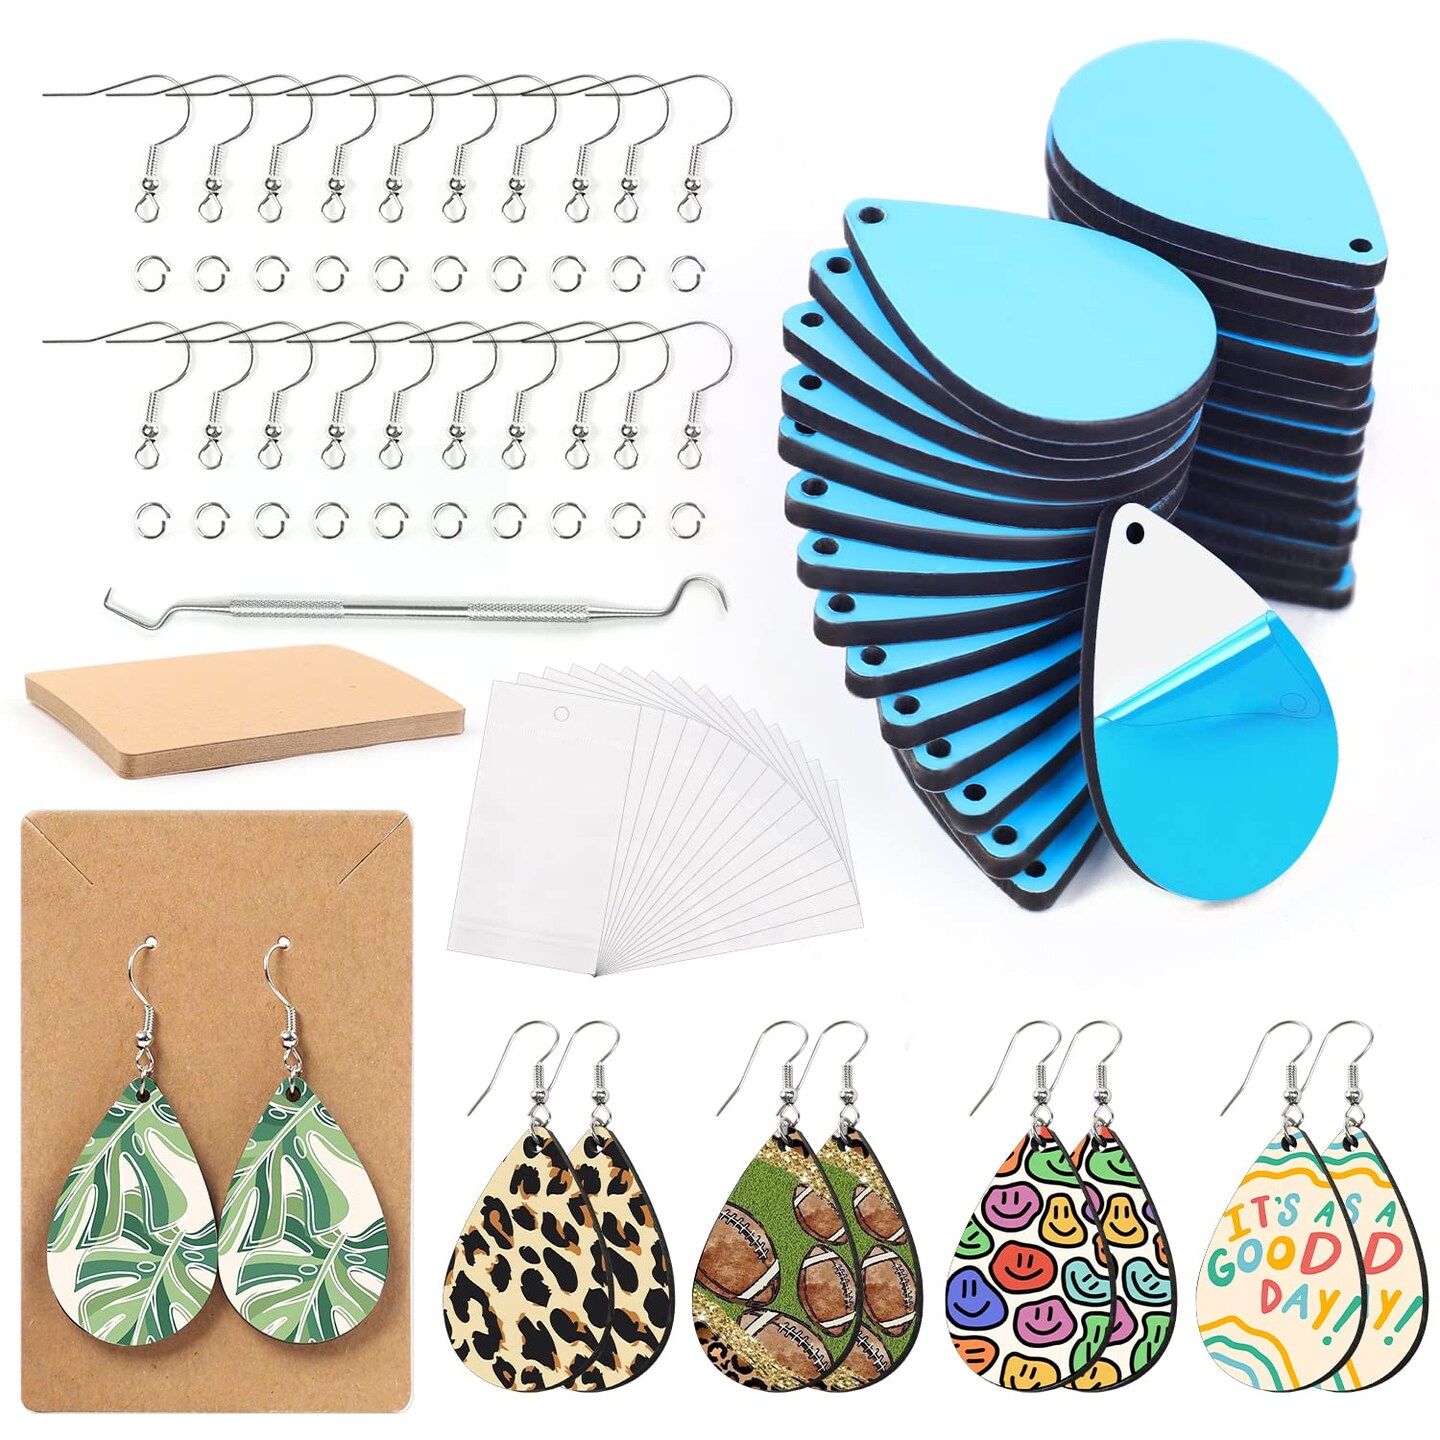  HTVRONT Sublimation Earring Blanks Bulk - 30 Pcs Wood Earrings  Blanks with Blue Protective Film - Unfinished MDF Teardrop Earrings for  Sublimation Printing with Template, Weeder, Hooks, Jump Rings : Arts